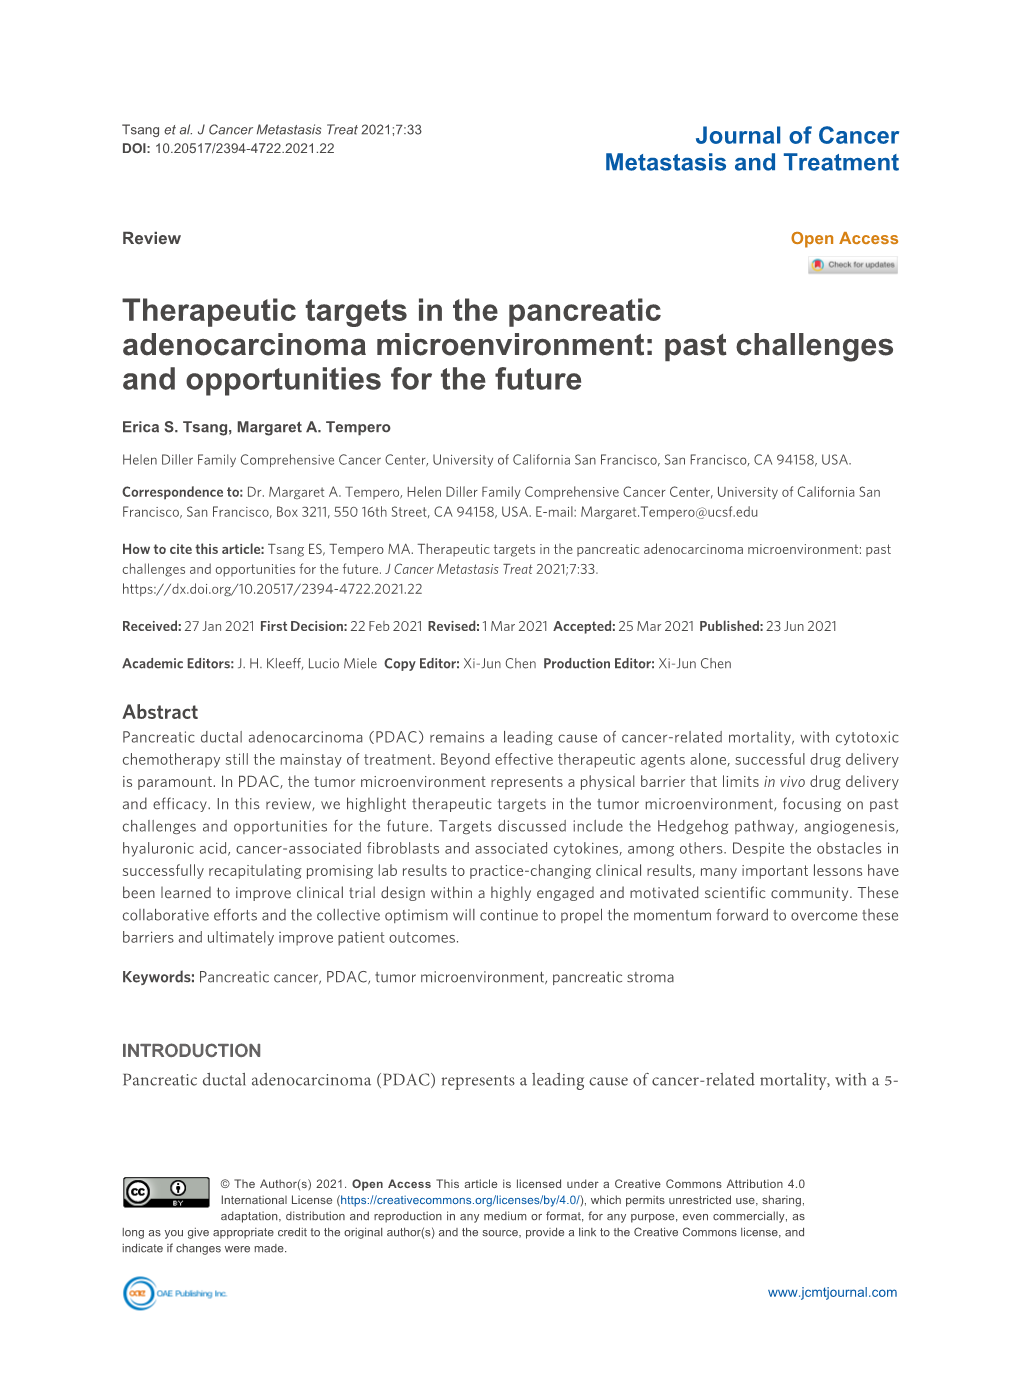 Therapeutic Targets in the Pancreatic Adenocarcinoma Microenvironment: Past Challenges and Opportunities for the Future